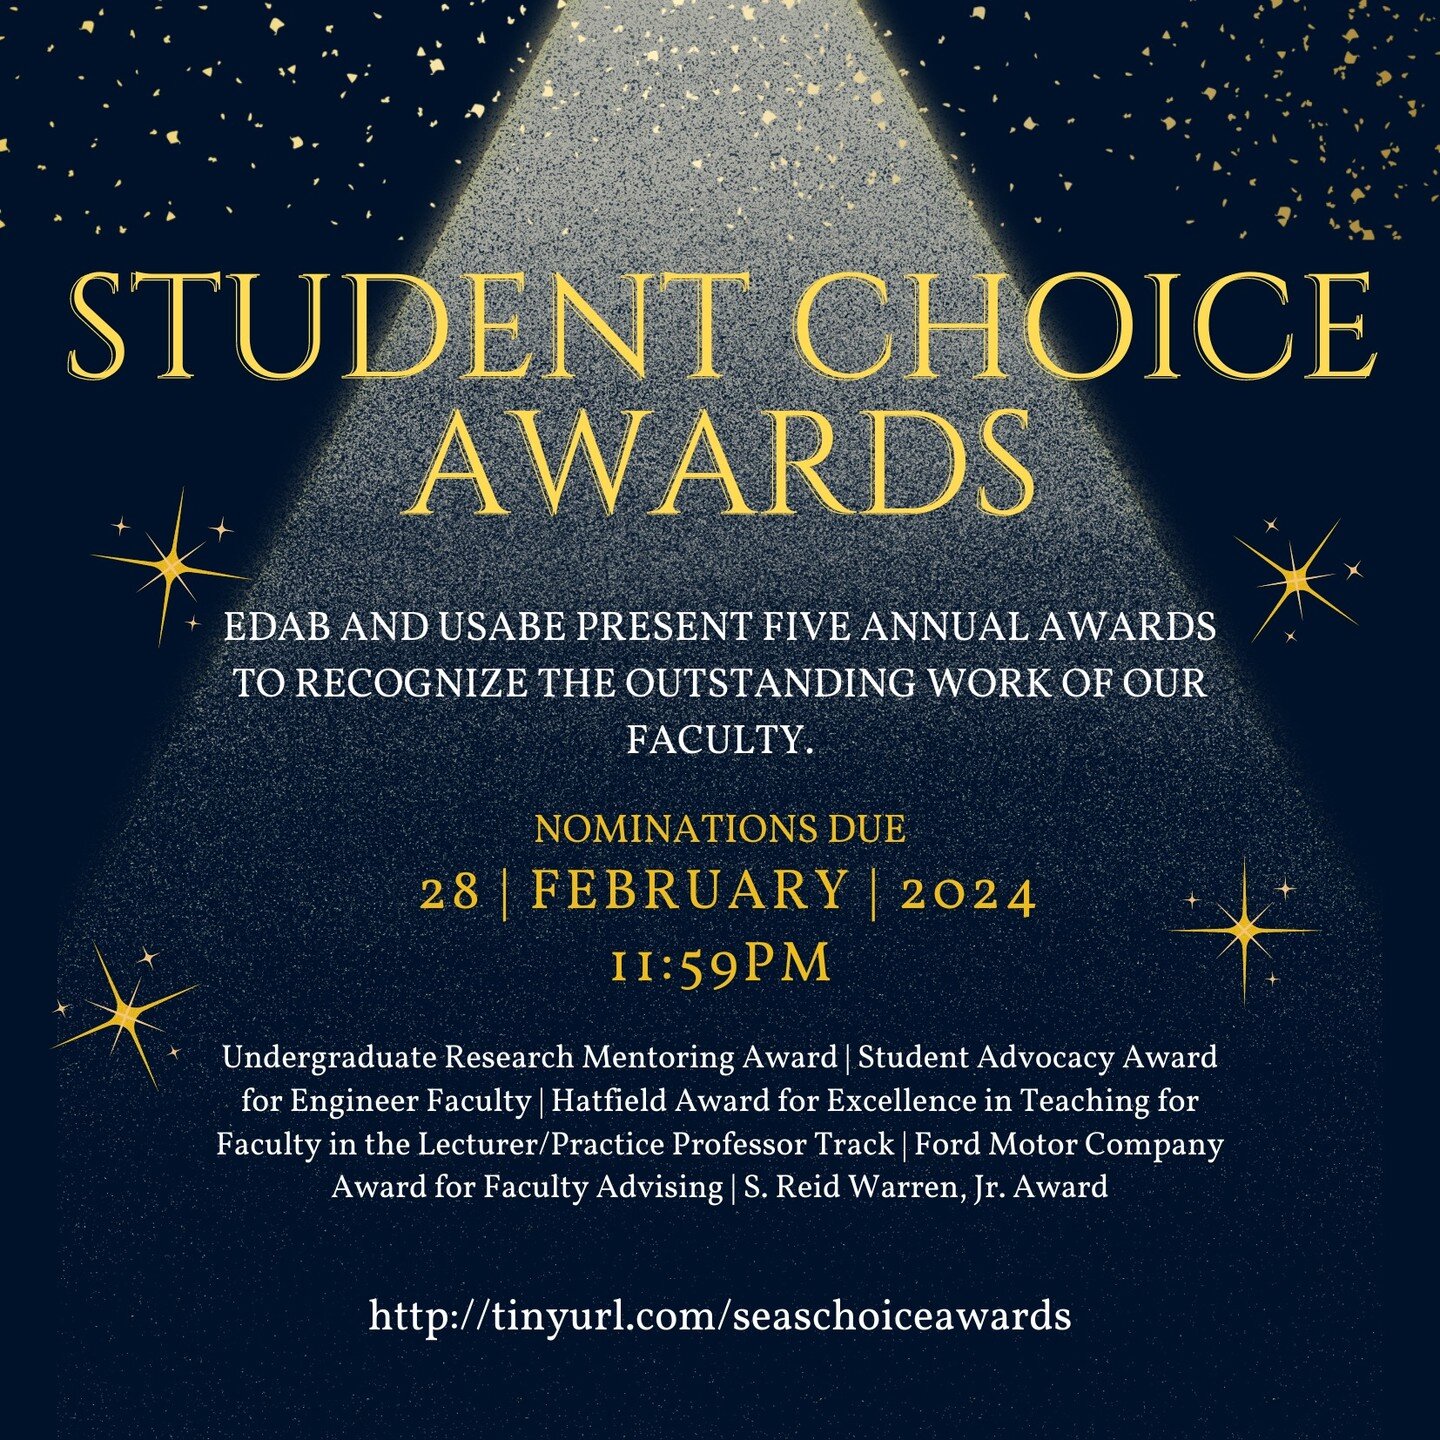 You know what time it is! It's time to nominate your favorite faculty for this year's Student Choice Awards, presented by EDAB in collaboration with USABE. Show your appreciation for Penn professors, research mentors, advisors, and more by submitting